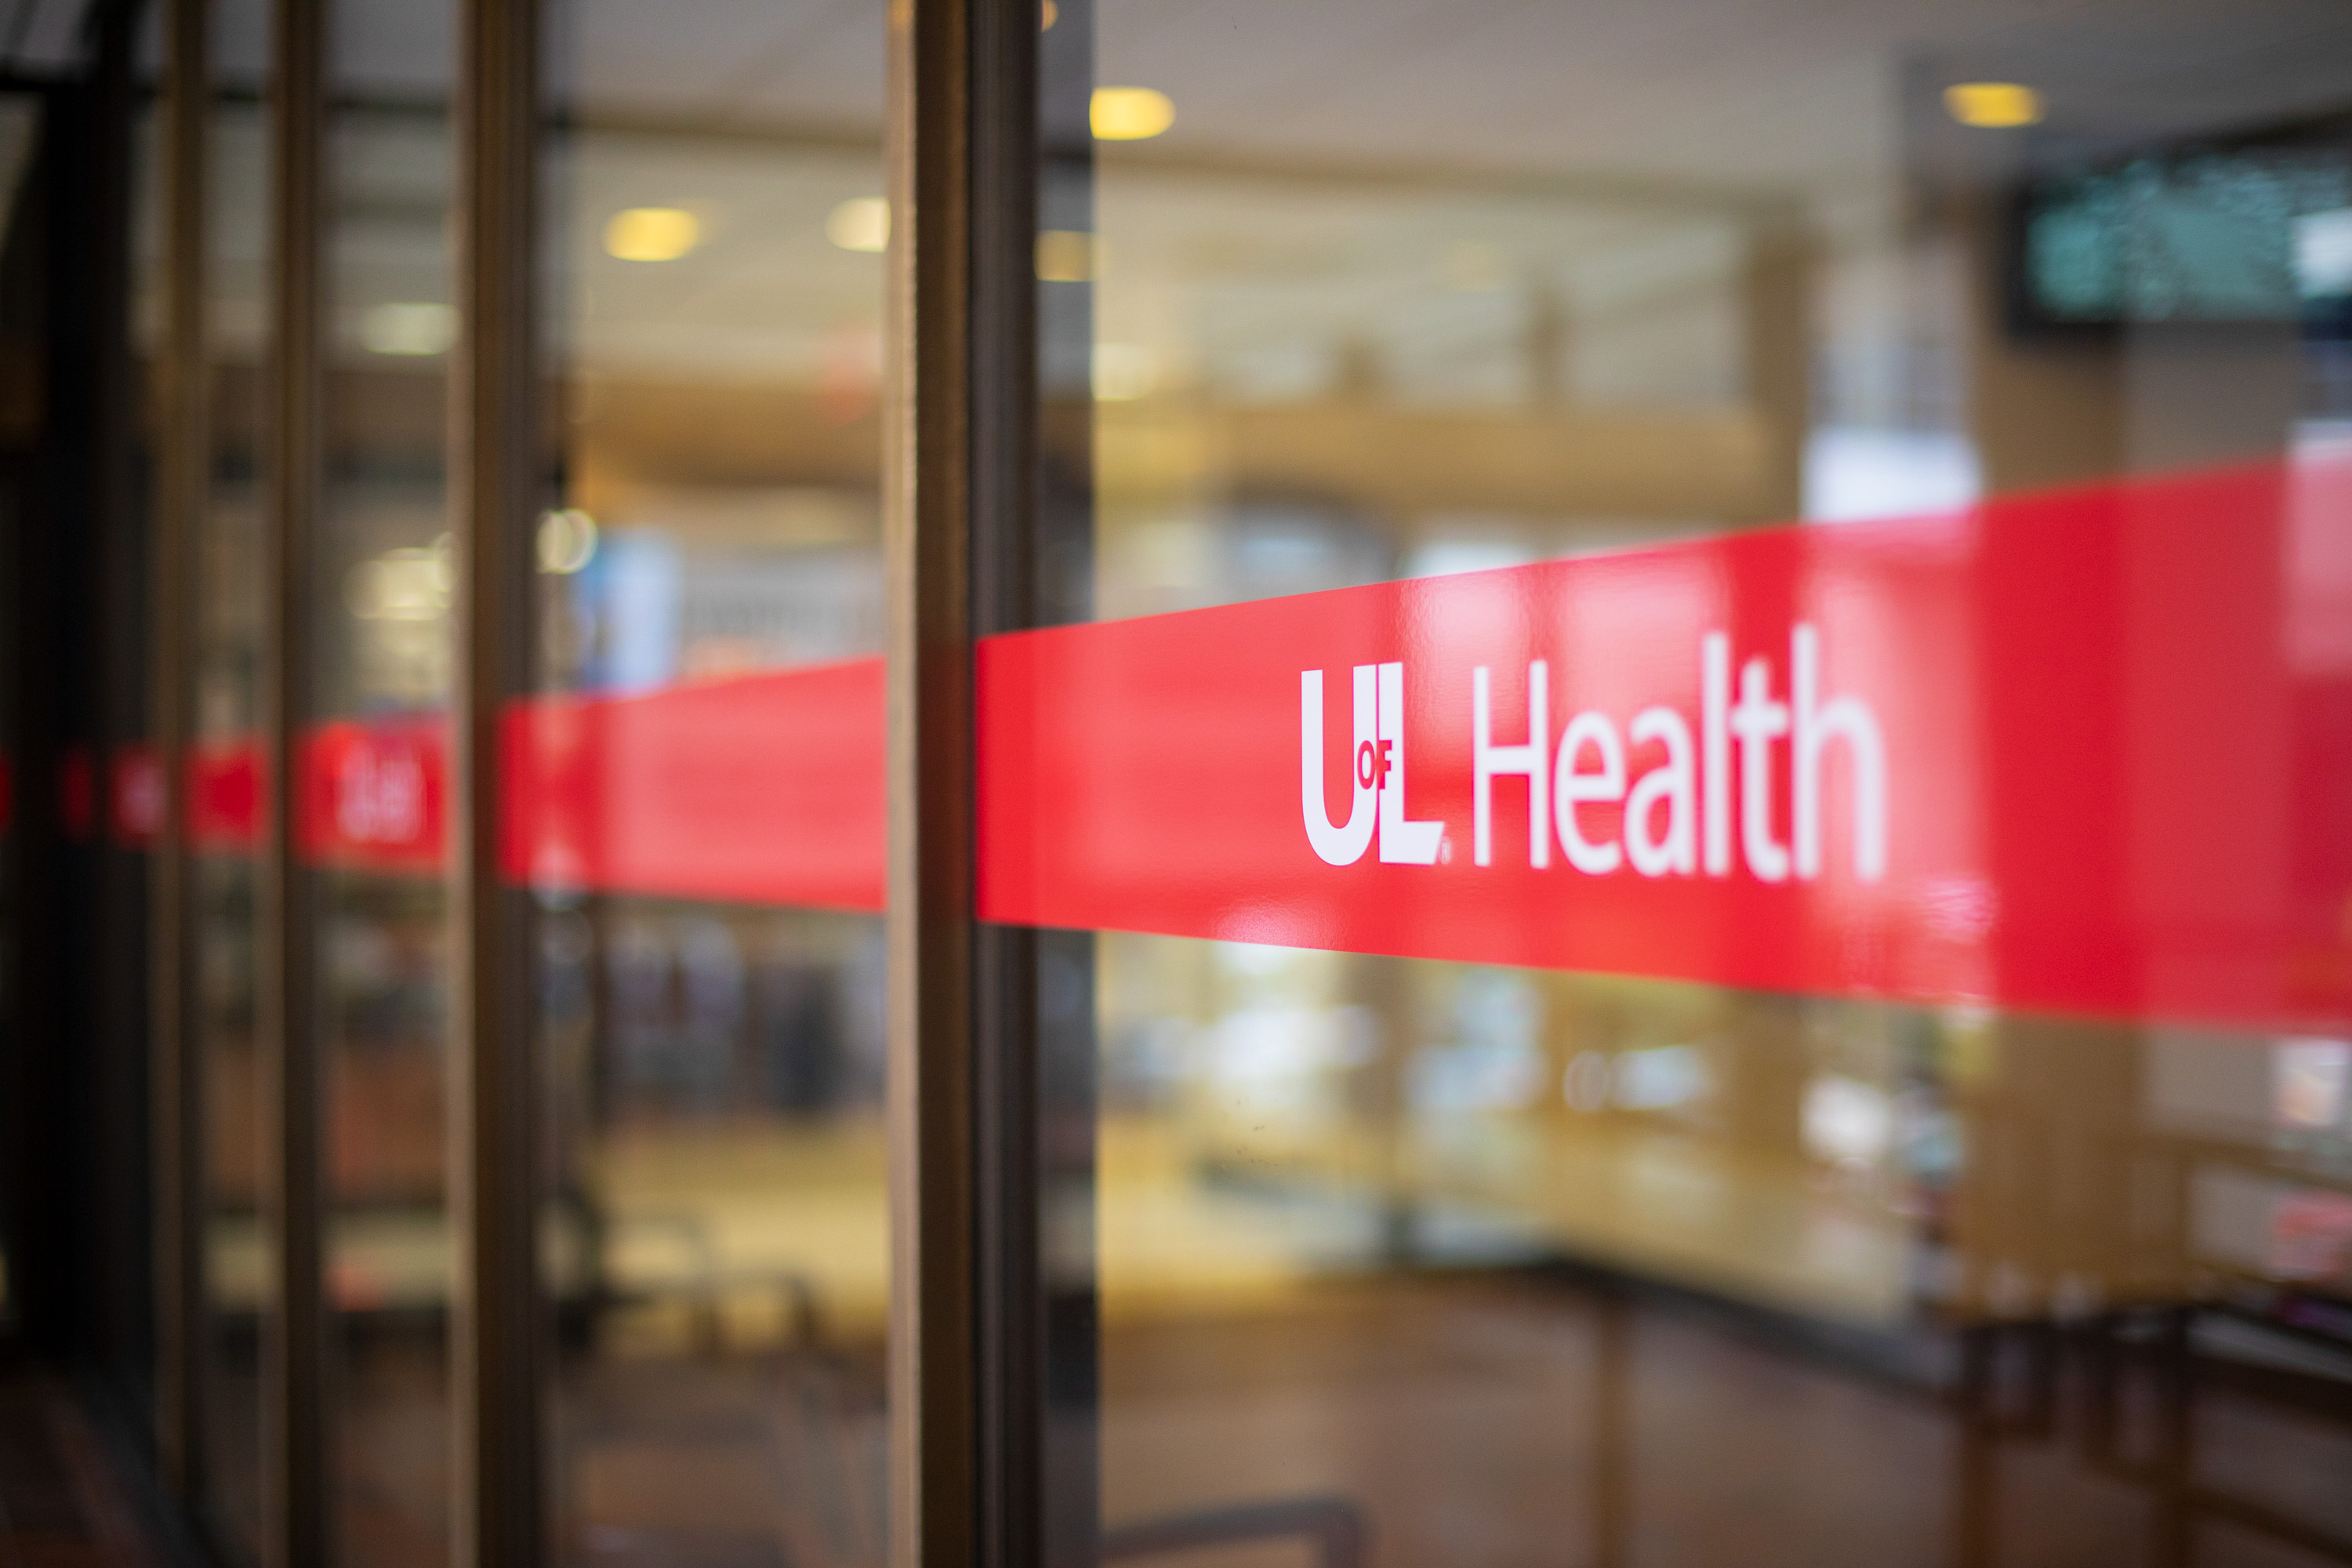 UofL Health now includes 6 hospitals, 4 medical centers and nearly 200 practice locations with more than 700 providers and 12,000 team members.